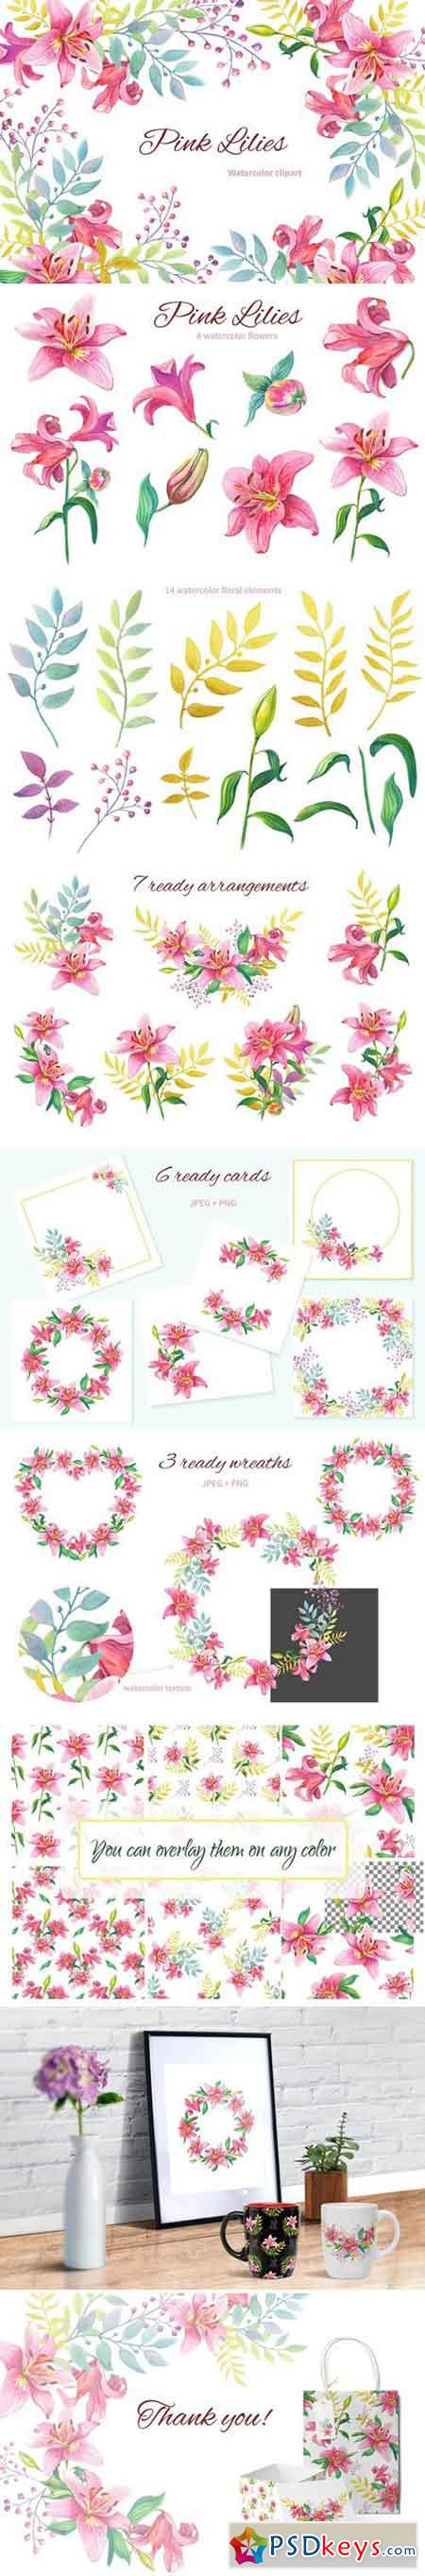 Pink Lilies Watercolor clipart 2071639